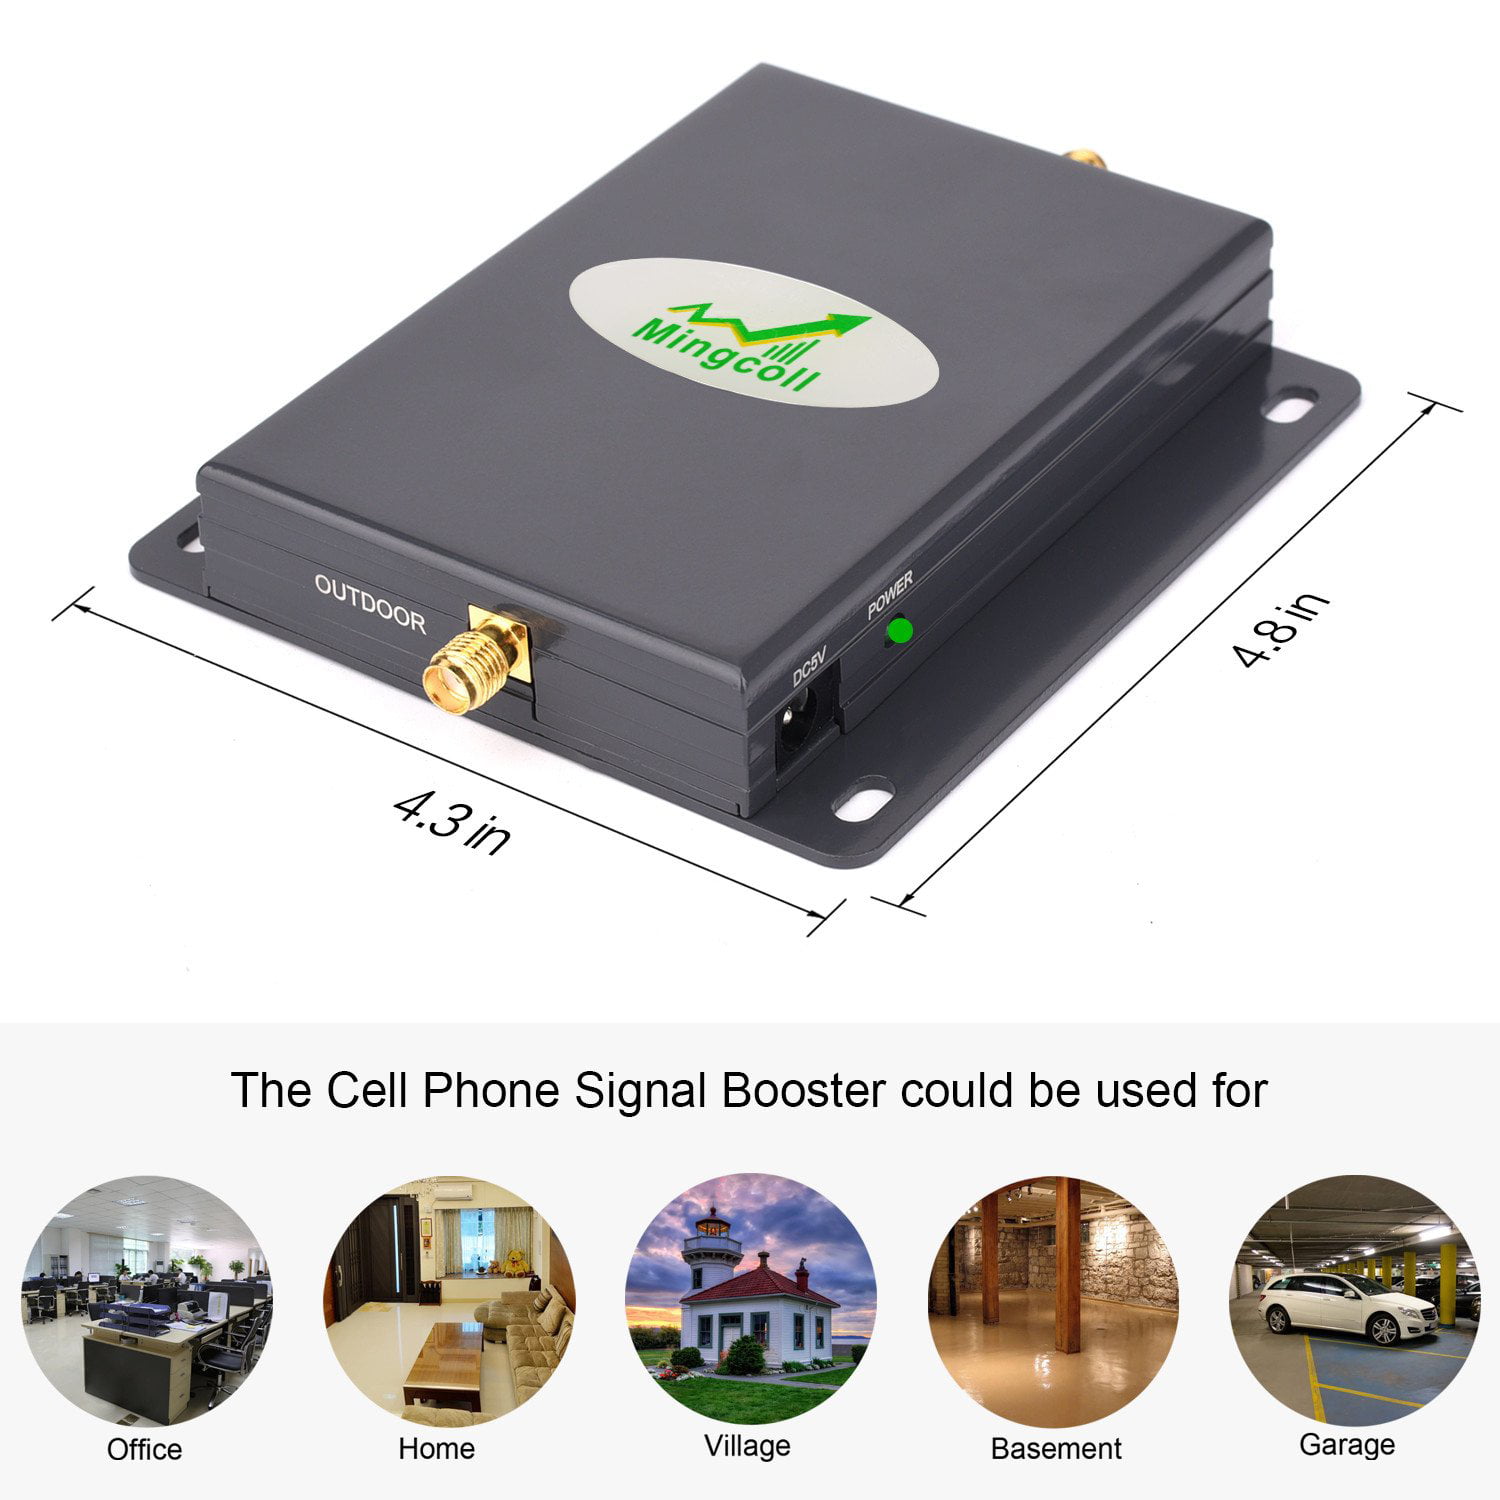 Home 4G LTE Cell Phone Signal Booster Verizon 700MHz Band 13 FDD Mobile Signal Repeater Booster Antennas Kits Improves 4G LTE Data Rates and Supports Volte 